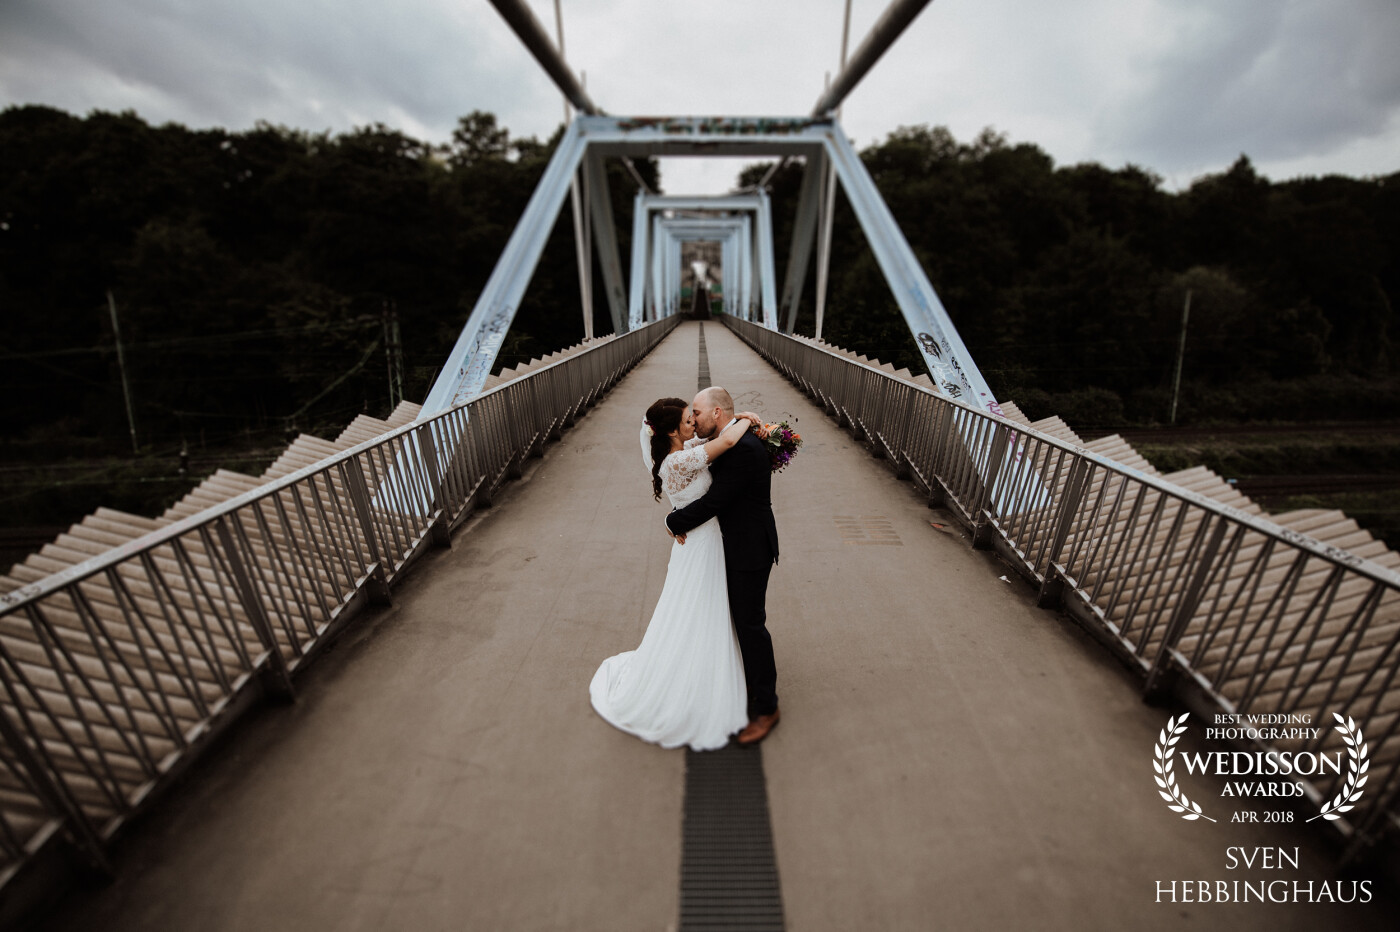 I took this picture on a small bridge during an urban wedding in Cologne. I like this "kiss on a bridge" because the bridal couple was so emotional and sweet. I capture this moment with this beautiful structure of the bridge.